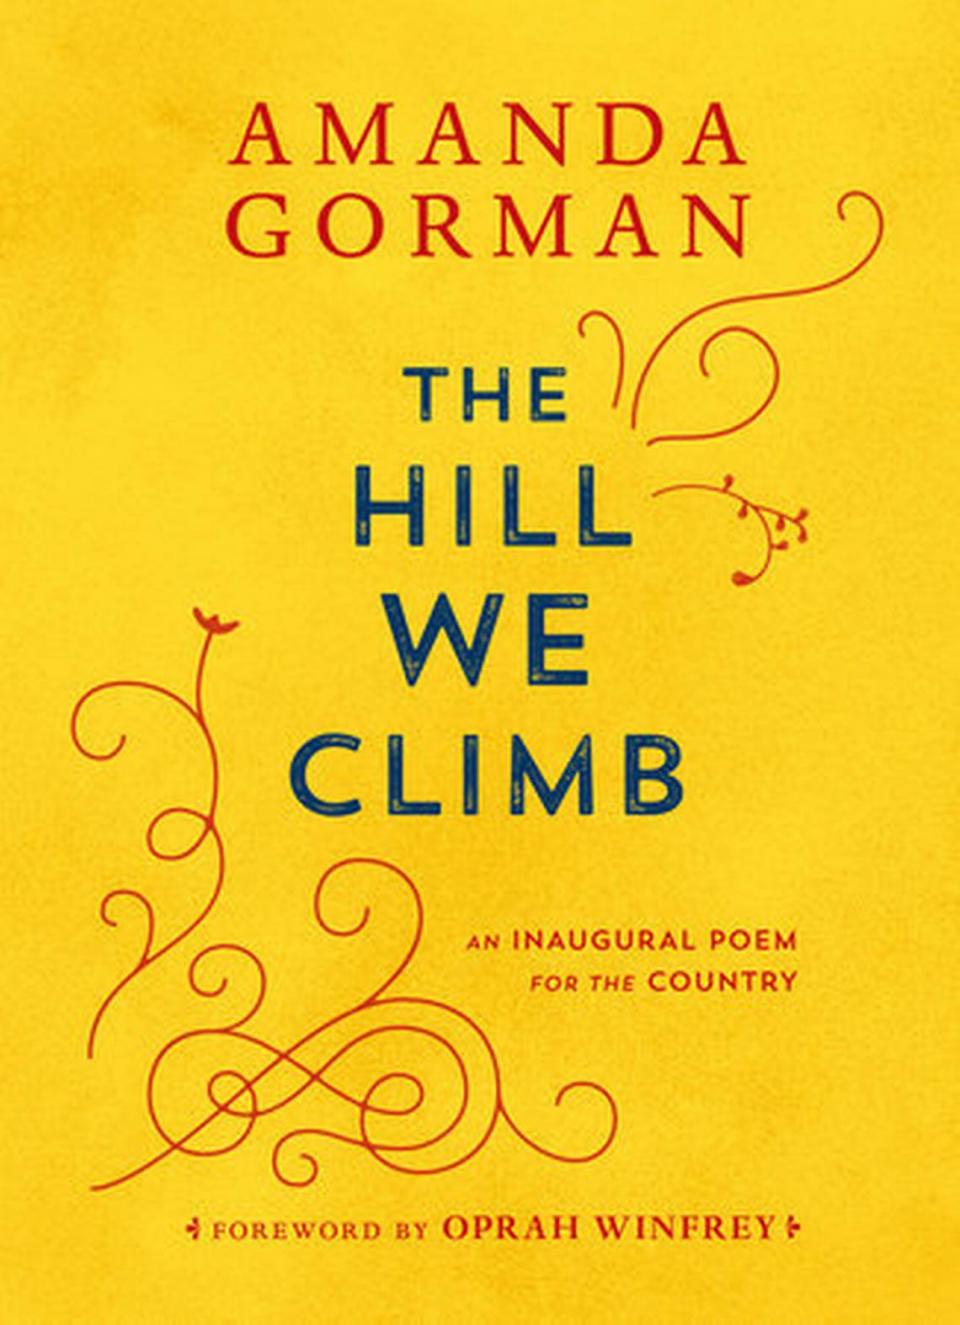 Cover of Amanda Gorman’s book containing the inaugural poem “The Hill We Climb” and a foreword by Oprah Winfrey. The Bob Graham Education Center in Miami Lakes, a Miami-Dade public school, put the book on a restricted list during the 2022-23 school year after a parent complained about it.